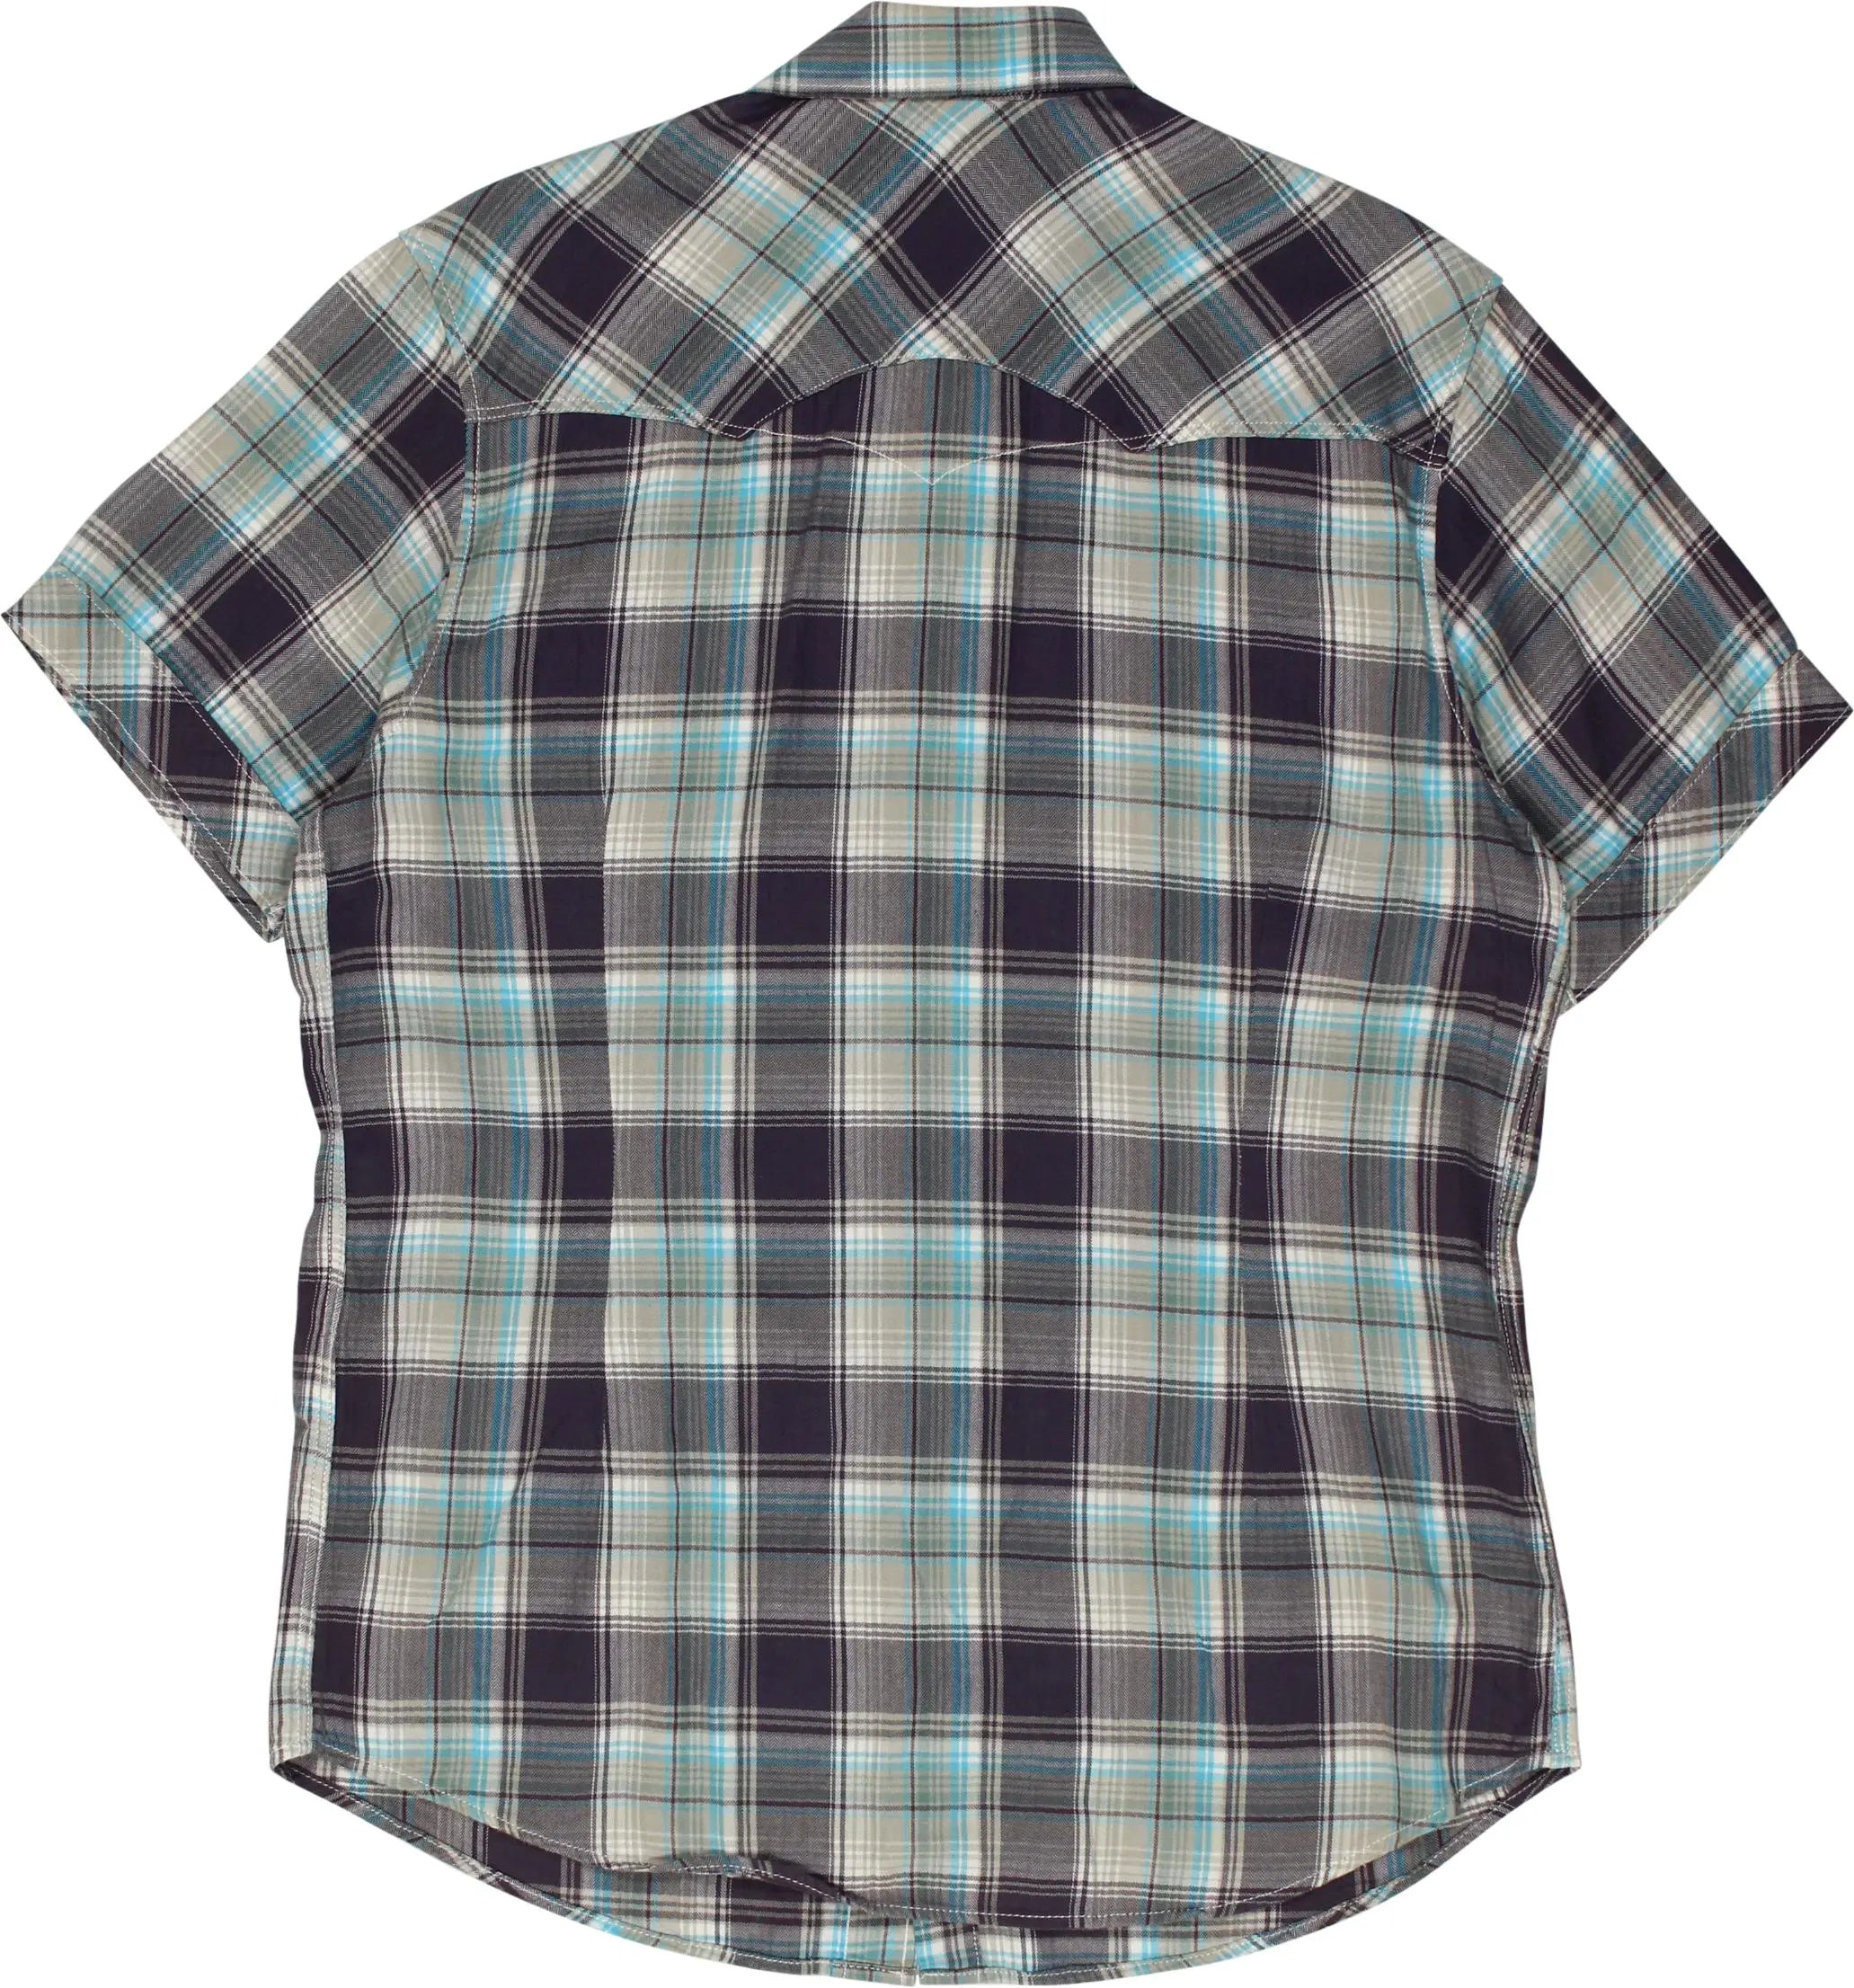 Levi's - Checkered Shirt by Levi's- ThriftTale.com - Vintage and second handclothing